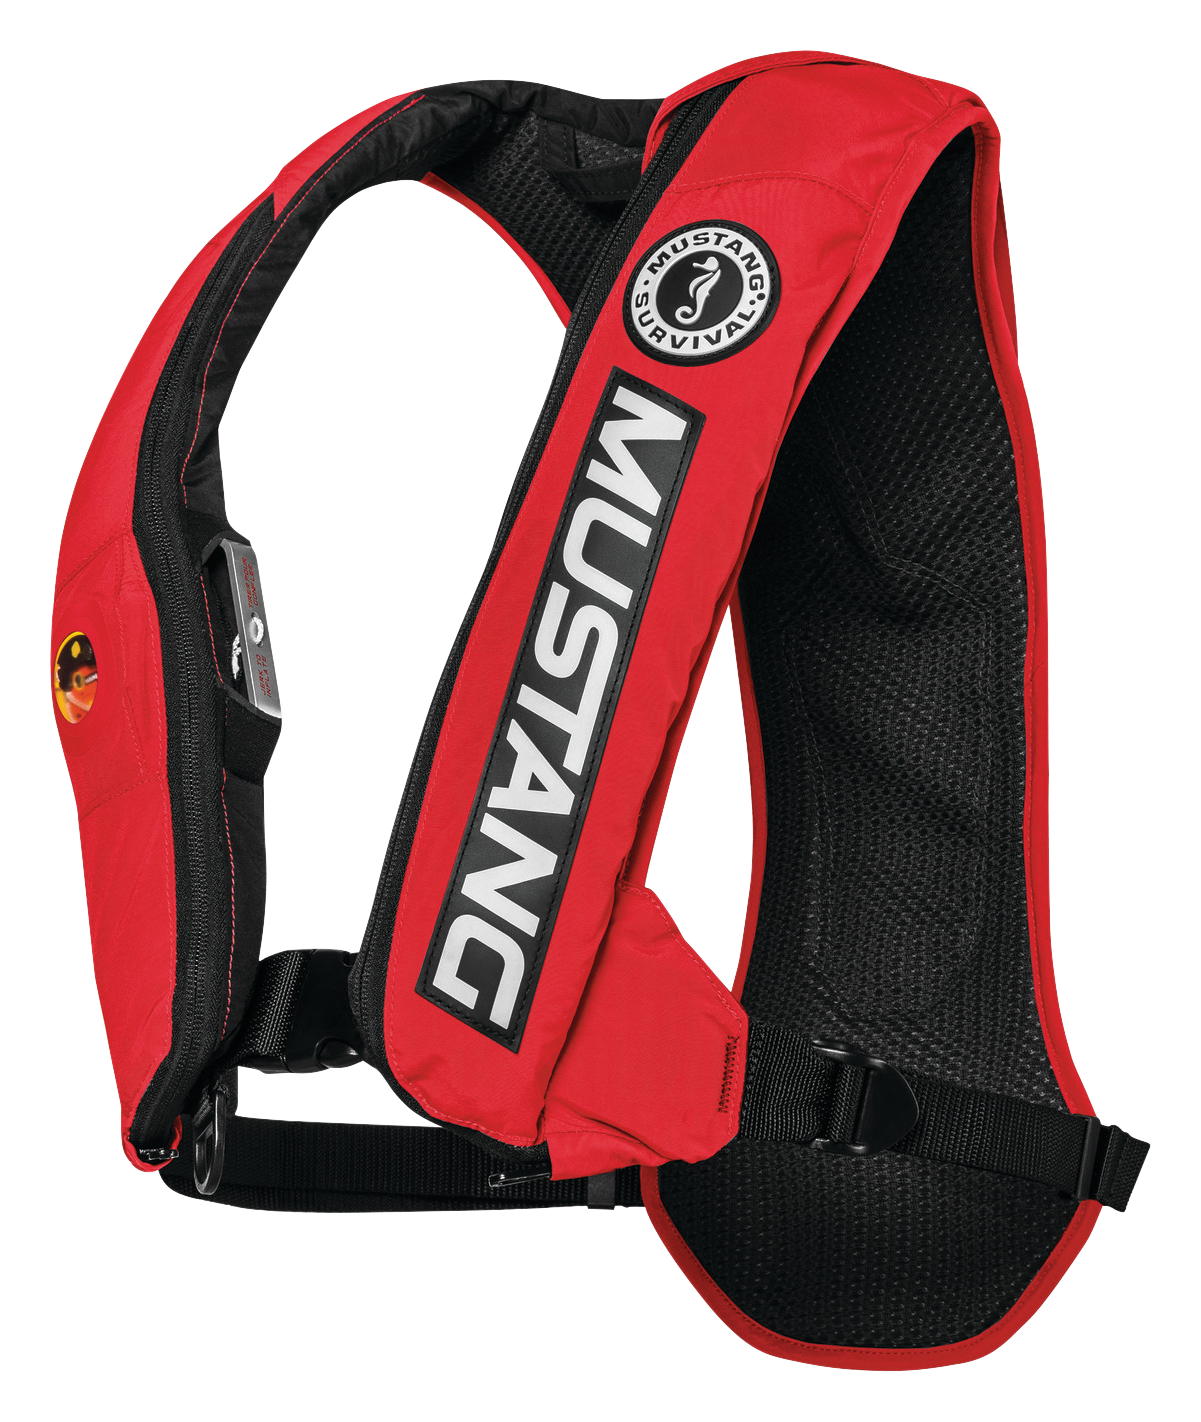 Mustang Survival Elite Inflatable Life Vest with HIT - Red